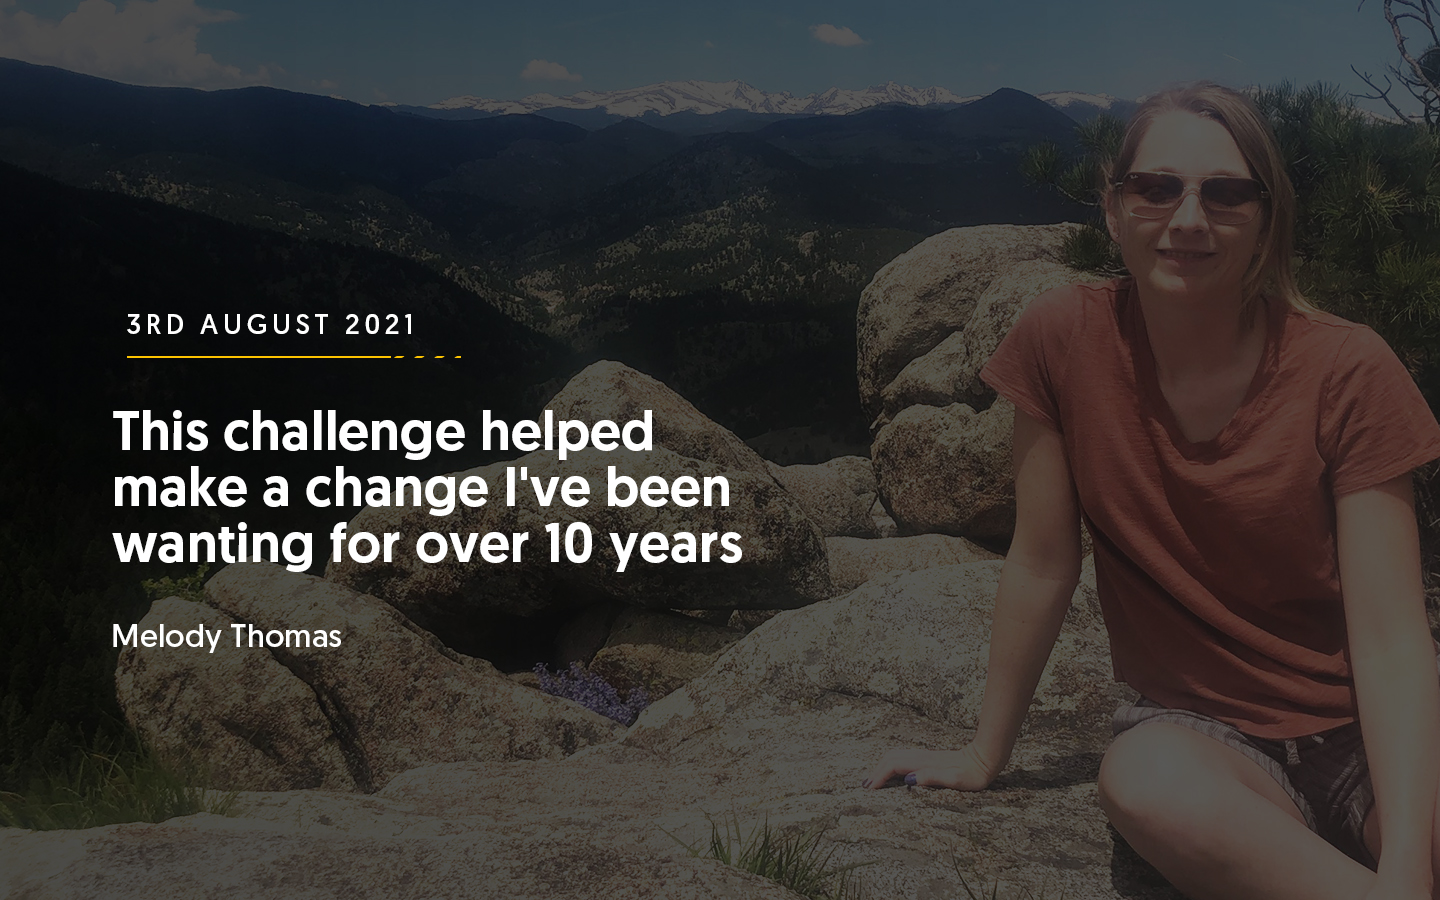 This challenge helped make a change I've been wanting for over 10 years – Melody Thomas